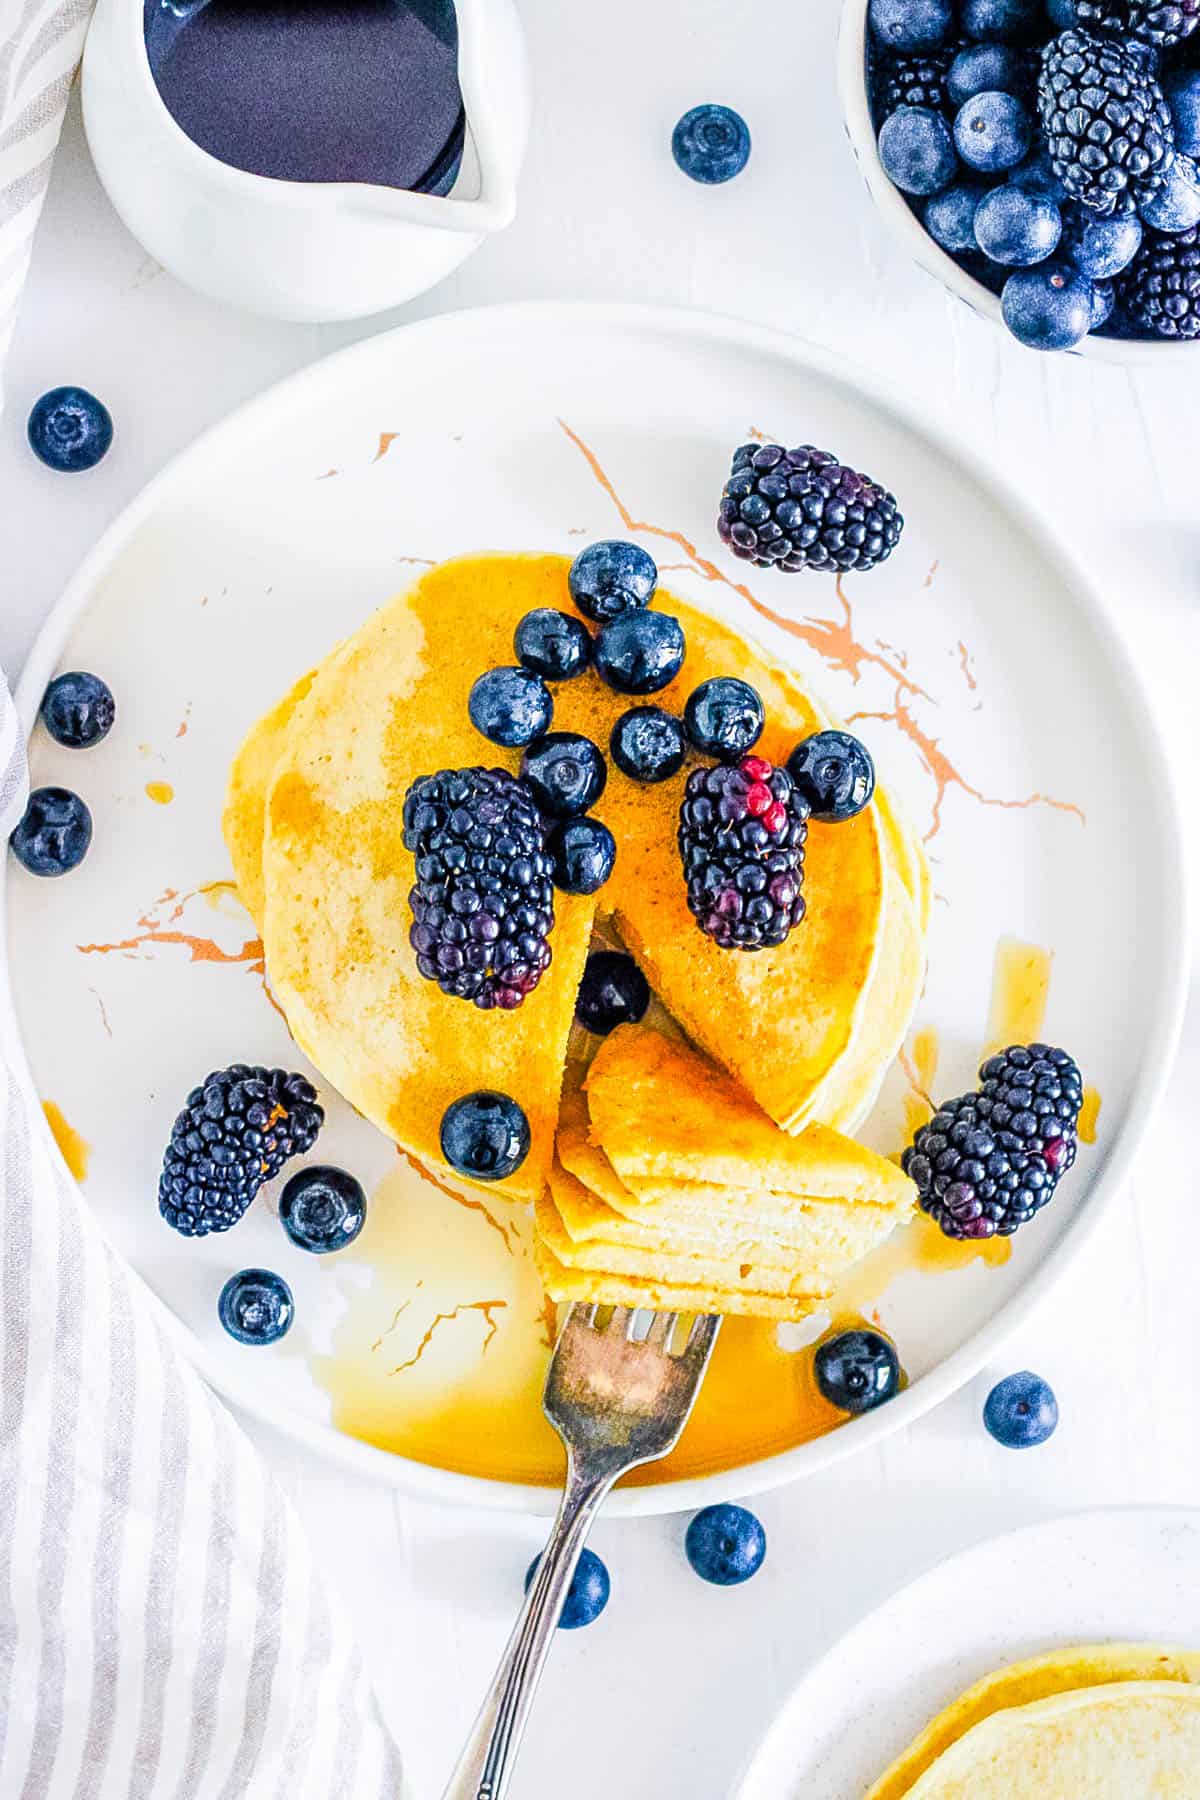 Vegan coconut flour pancakes topped with berries and syrup on a white plate.